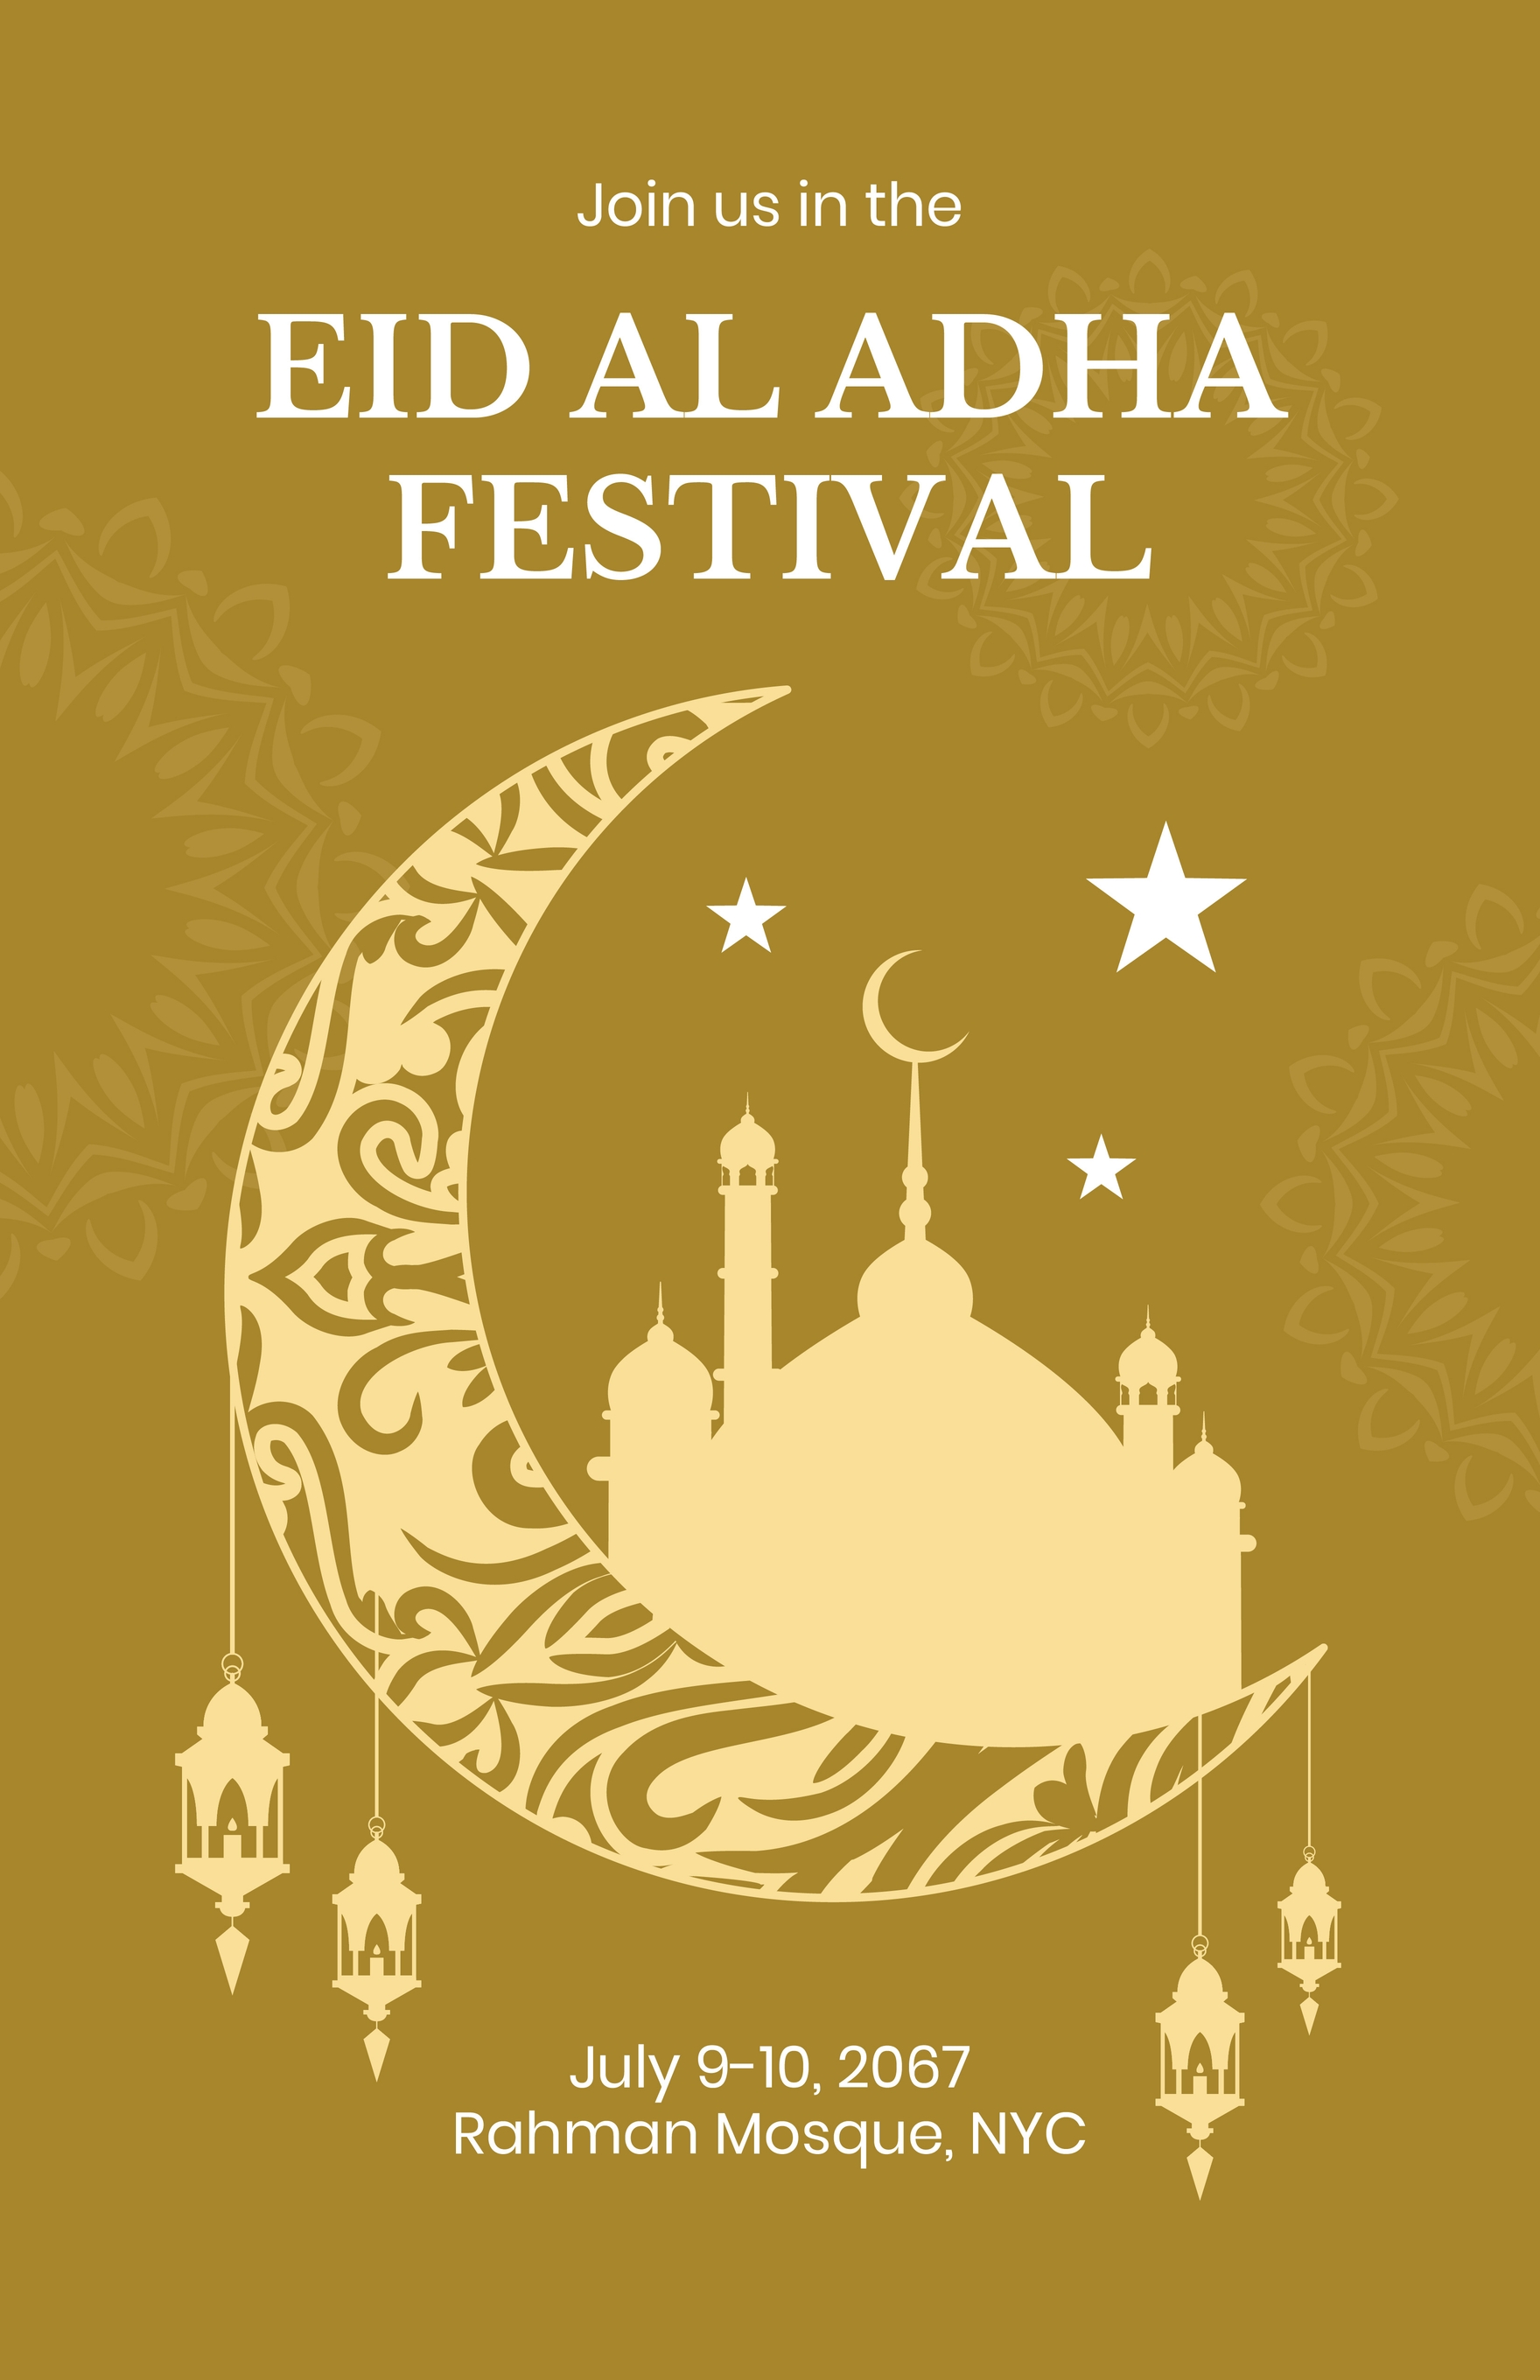 Free Eid Al Adha Festival Poster in Word, Google Docs, Illustrator, PSD, Apple Pages, Publisher